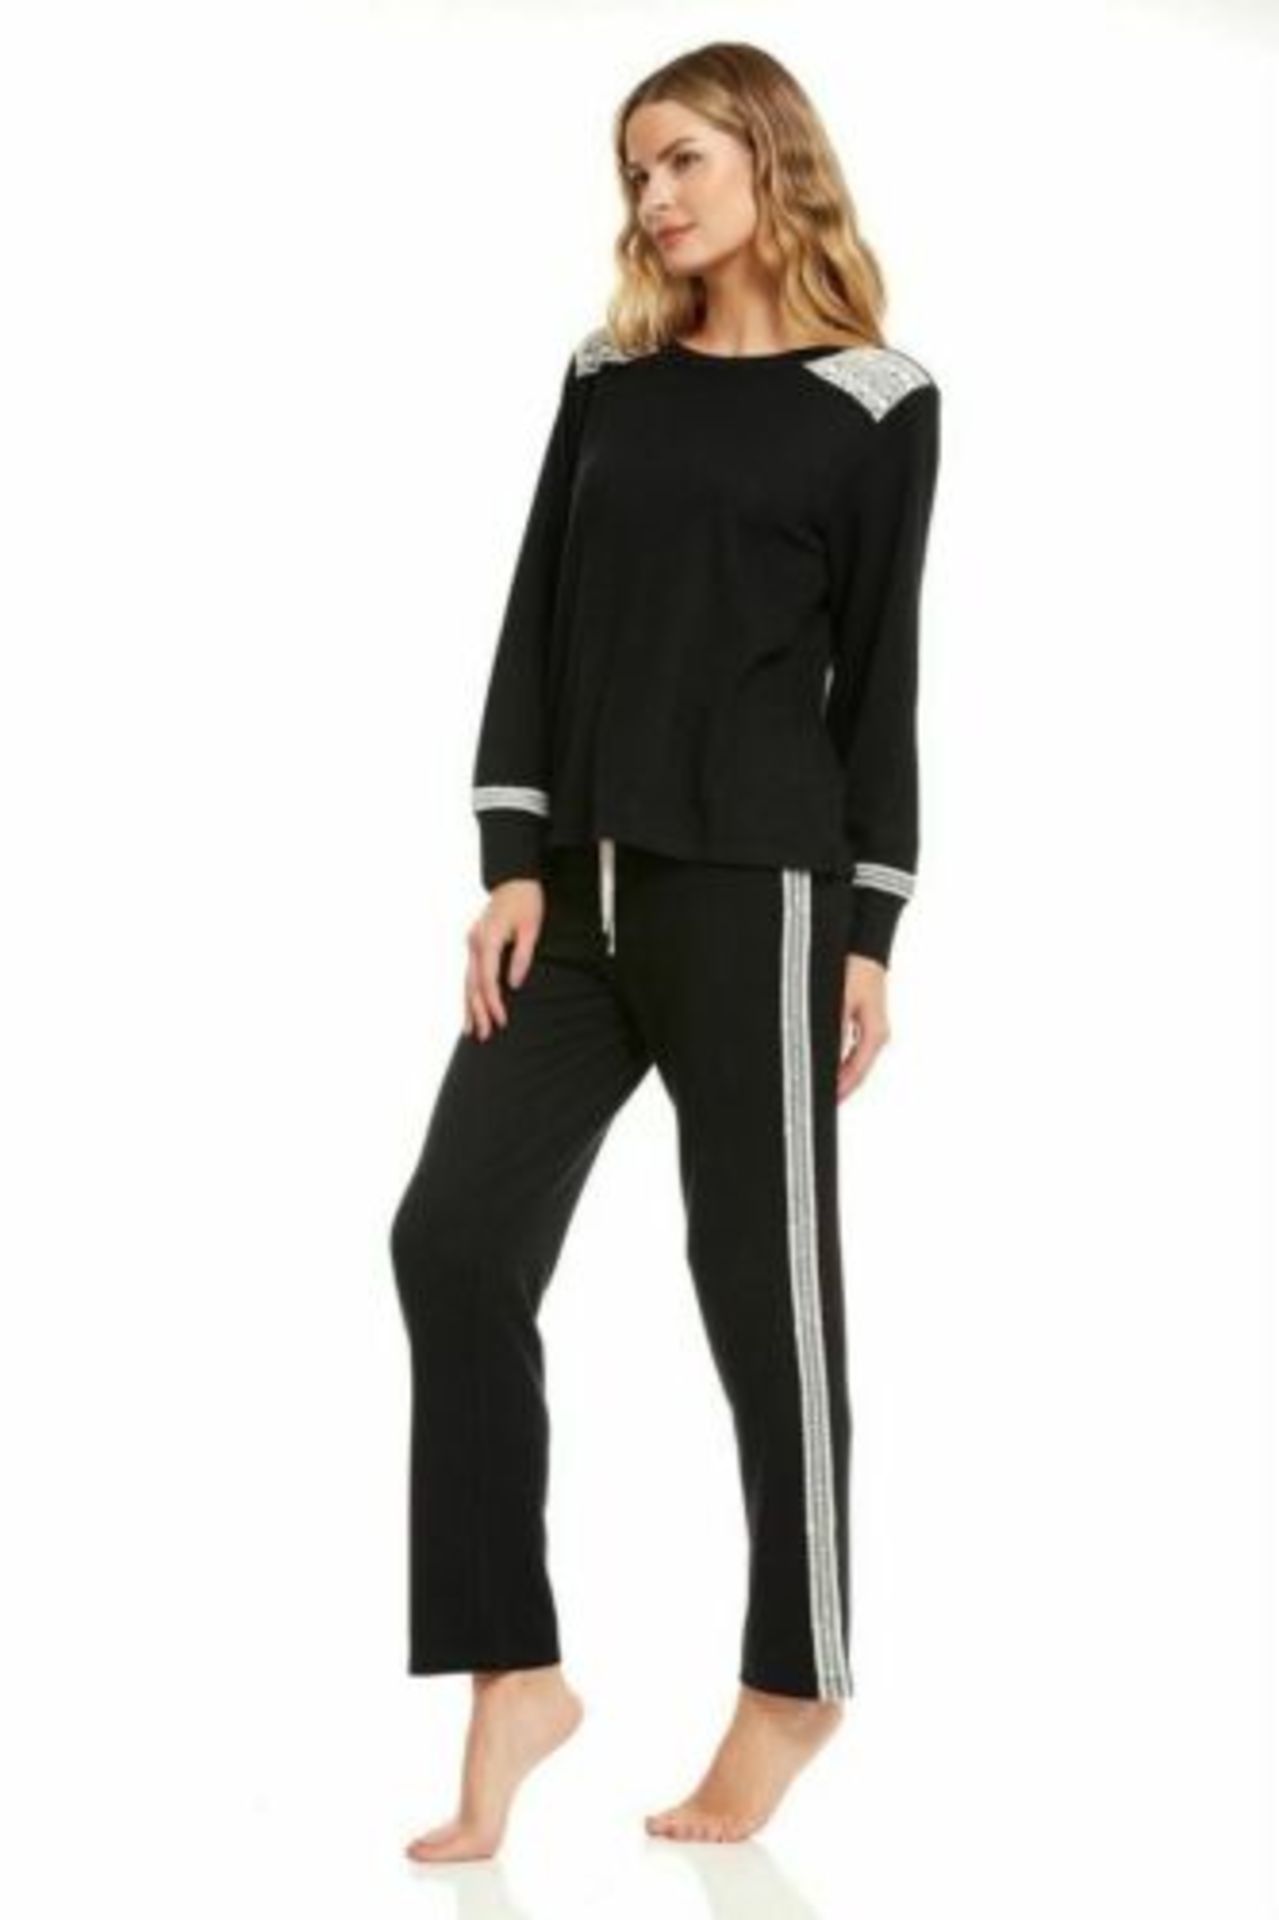 Flora Nikrooz Women's 2-Piece Long Sleeve Lounge Set with Lace Black Small - Image 3 of 6